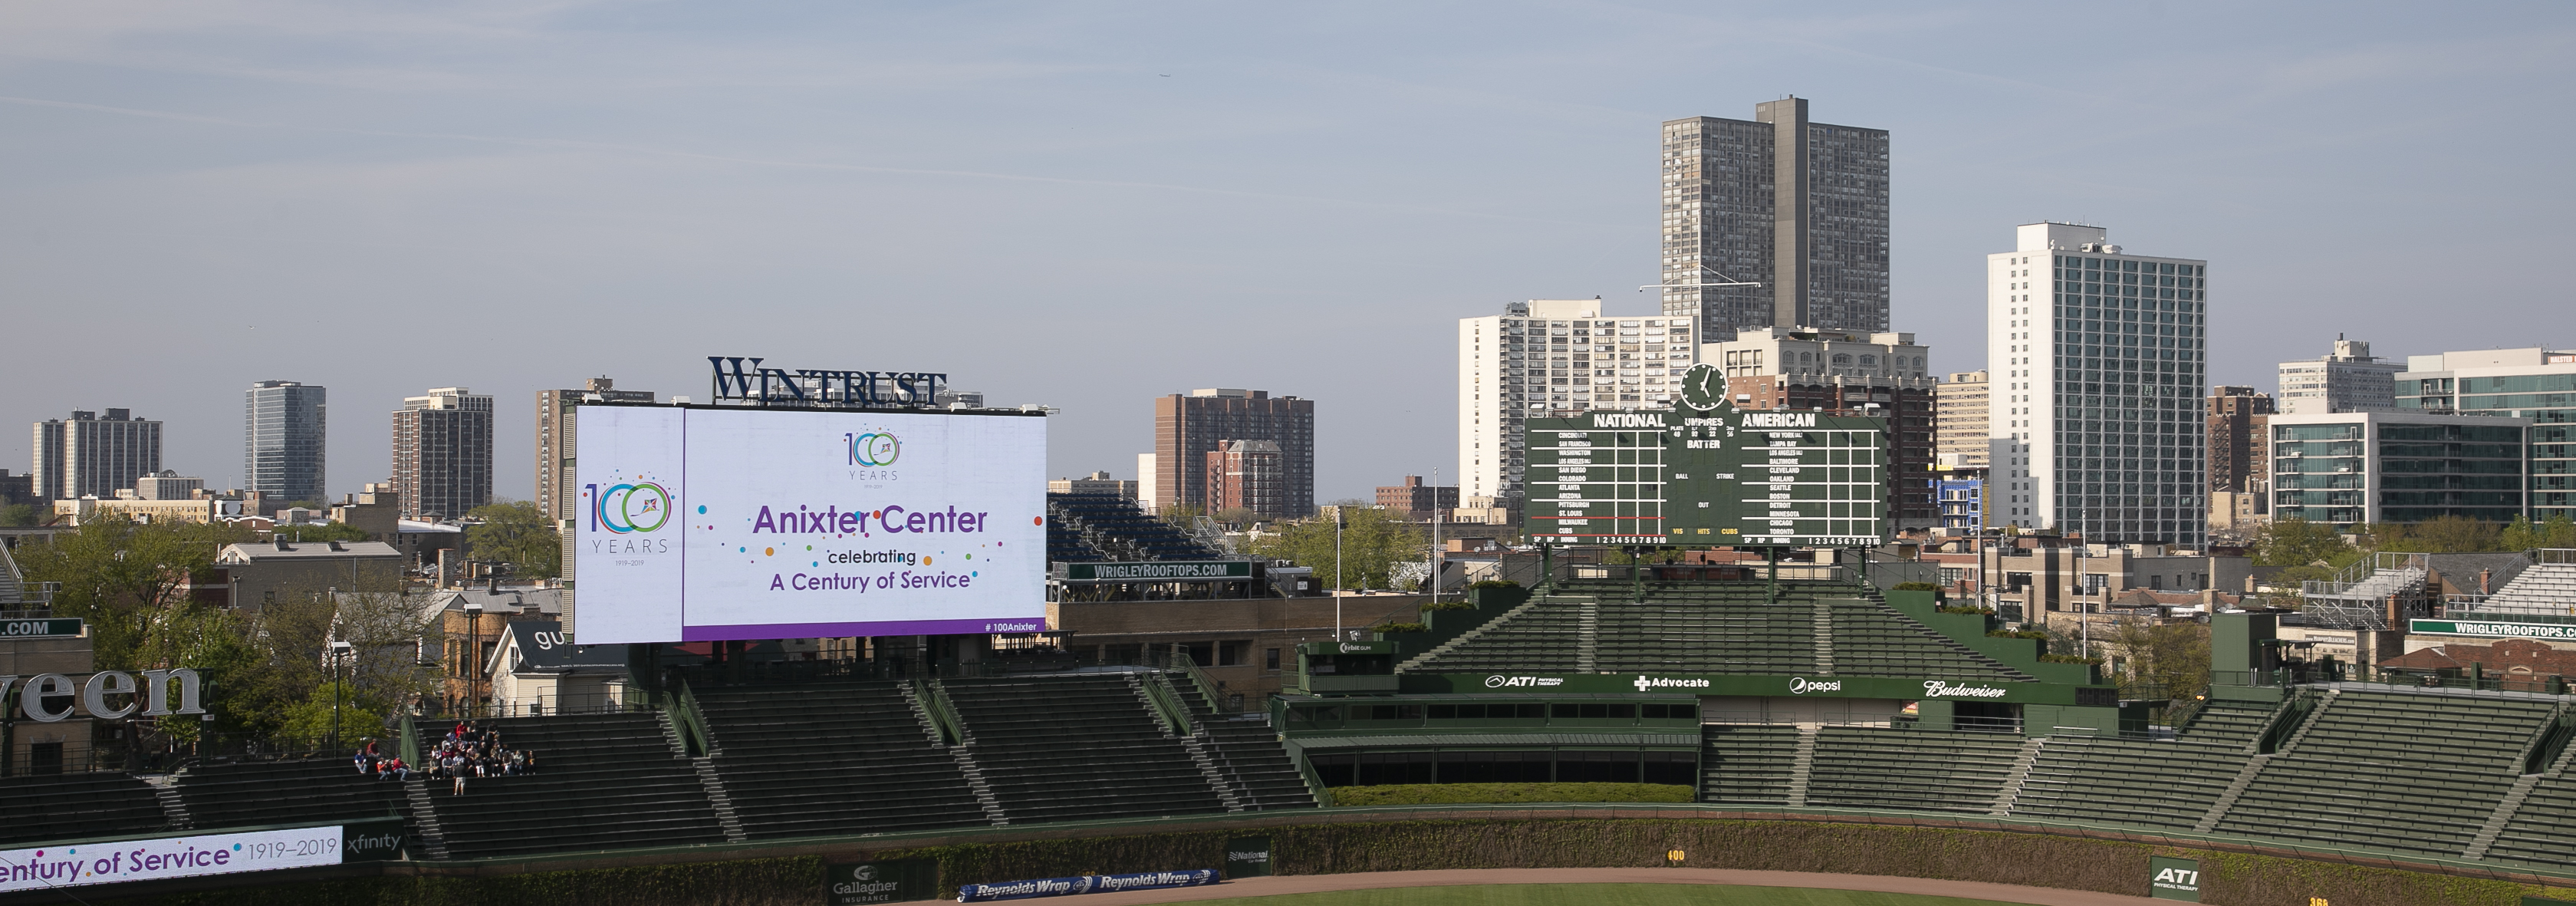 Anixter Center celebrating A Century of Service builboard at Wrigley Field